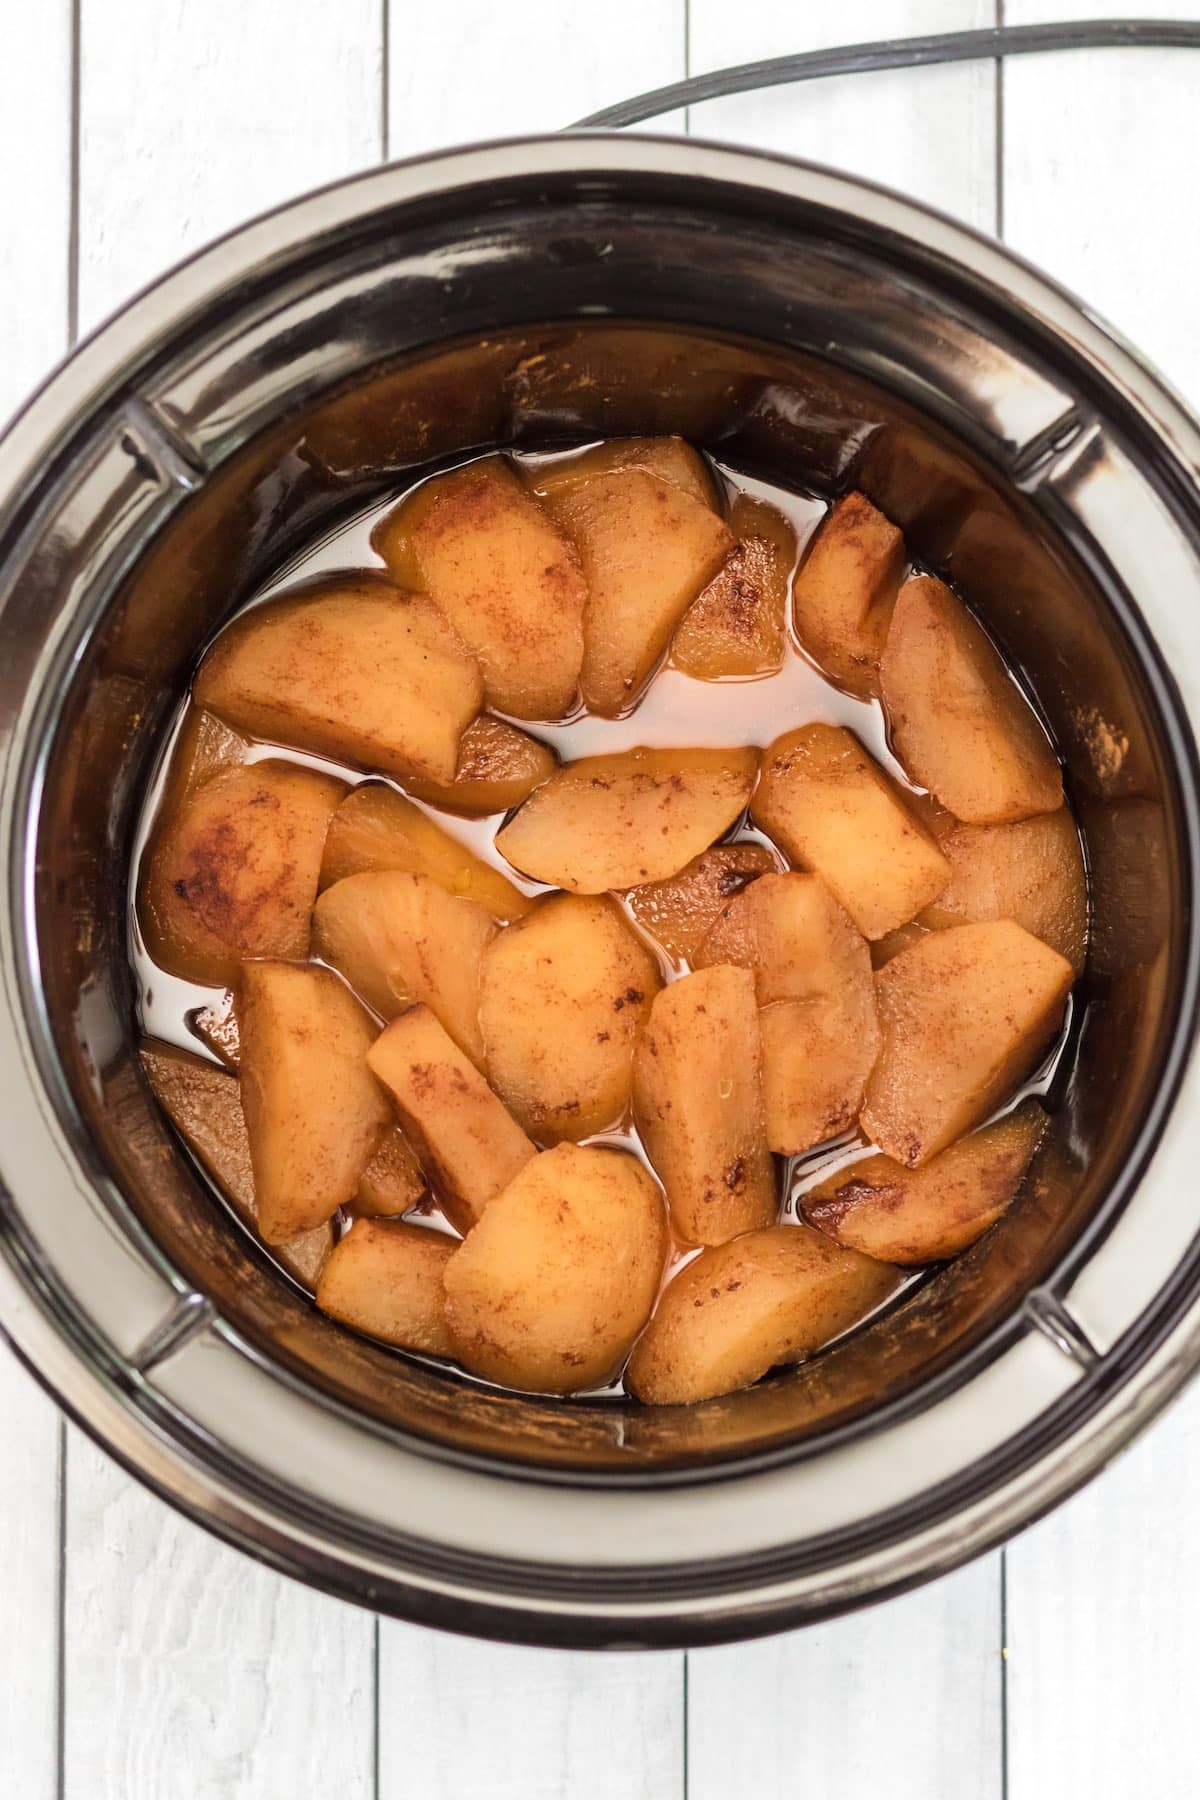 cooked apples in crockpot